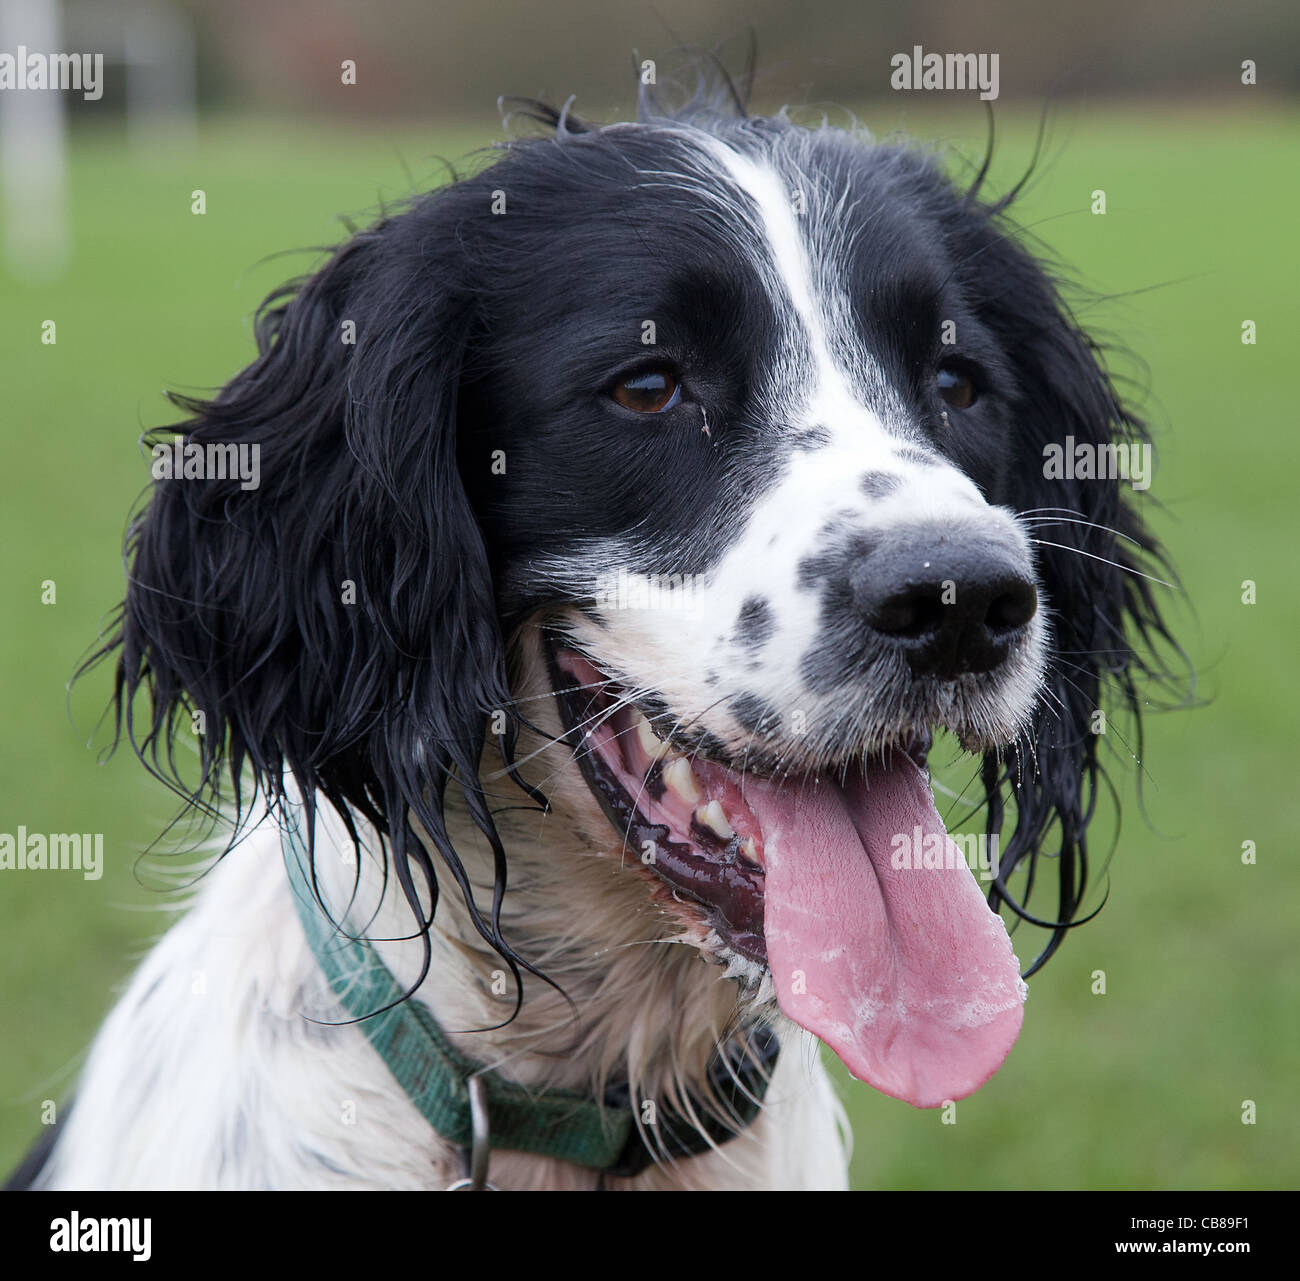 Black And White Springer Spaniel High Resolution Stock Photography And Images Alamy